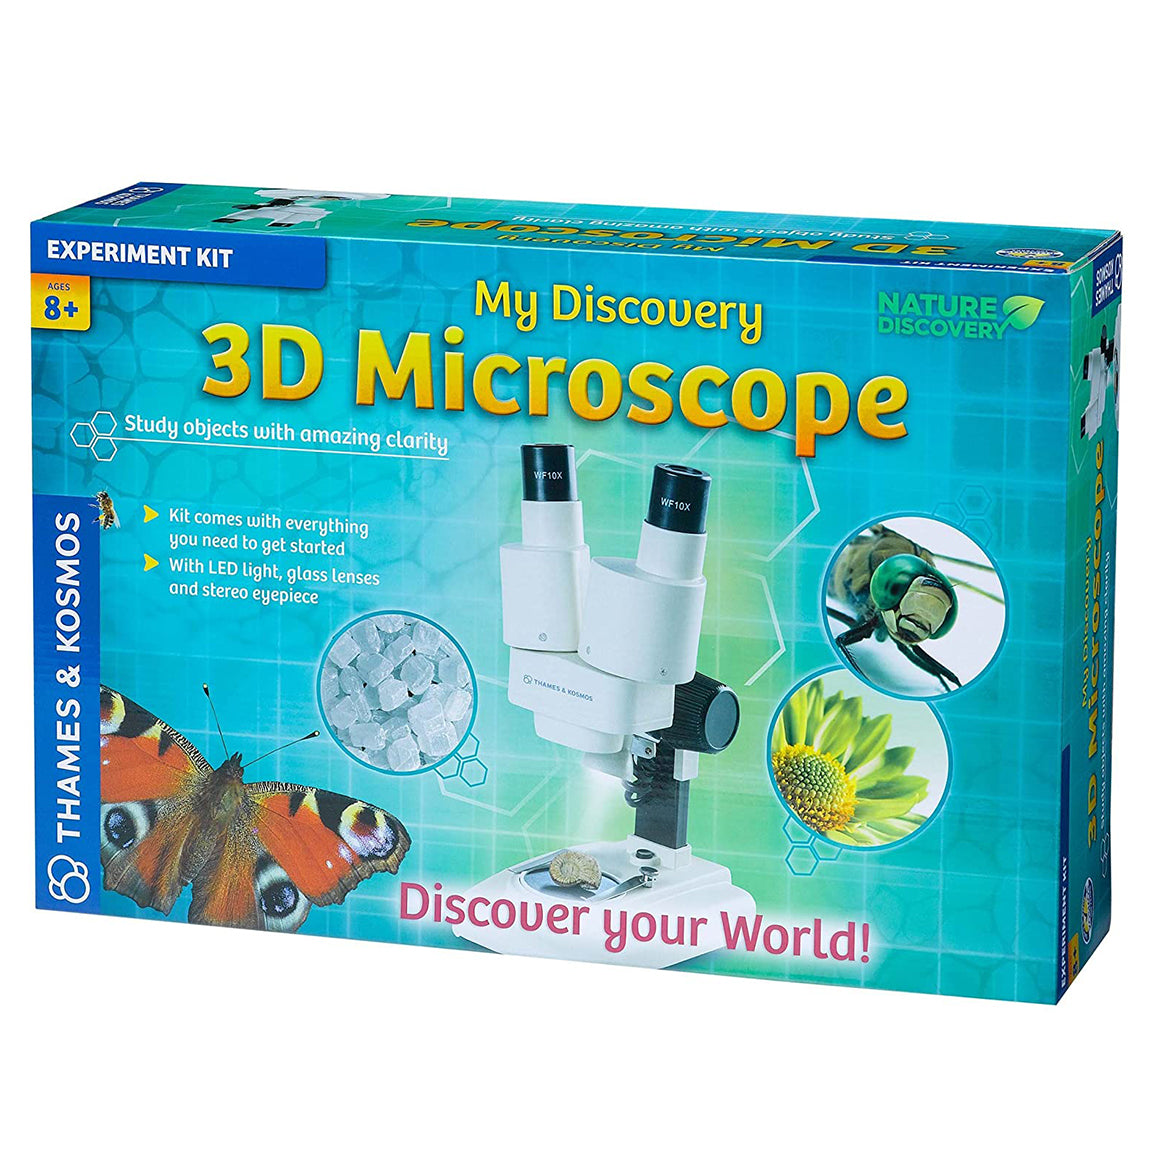 510463 My Discovery 3D Microscope 8+